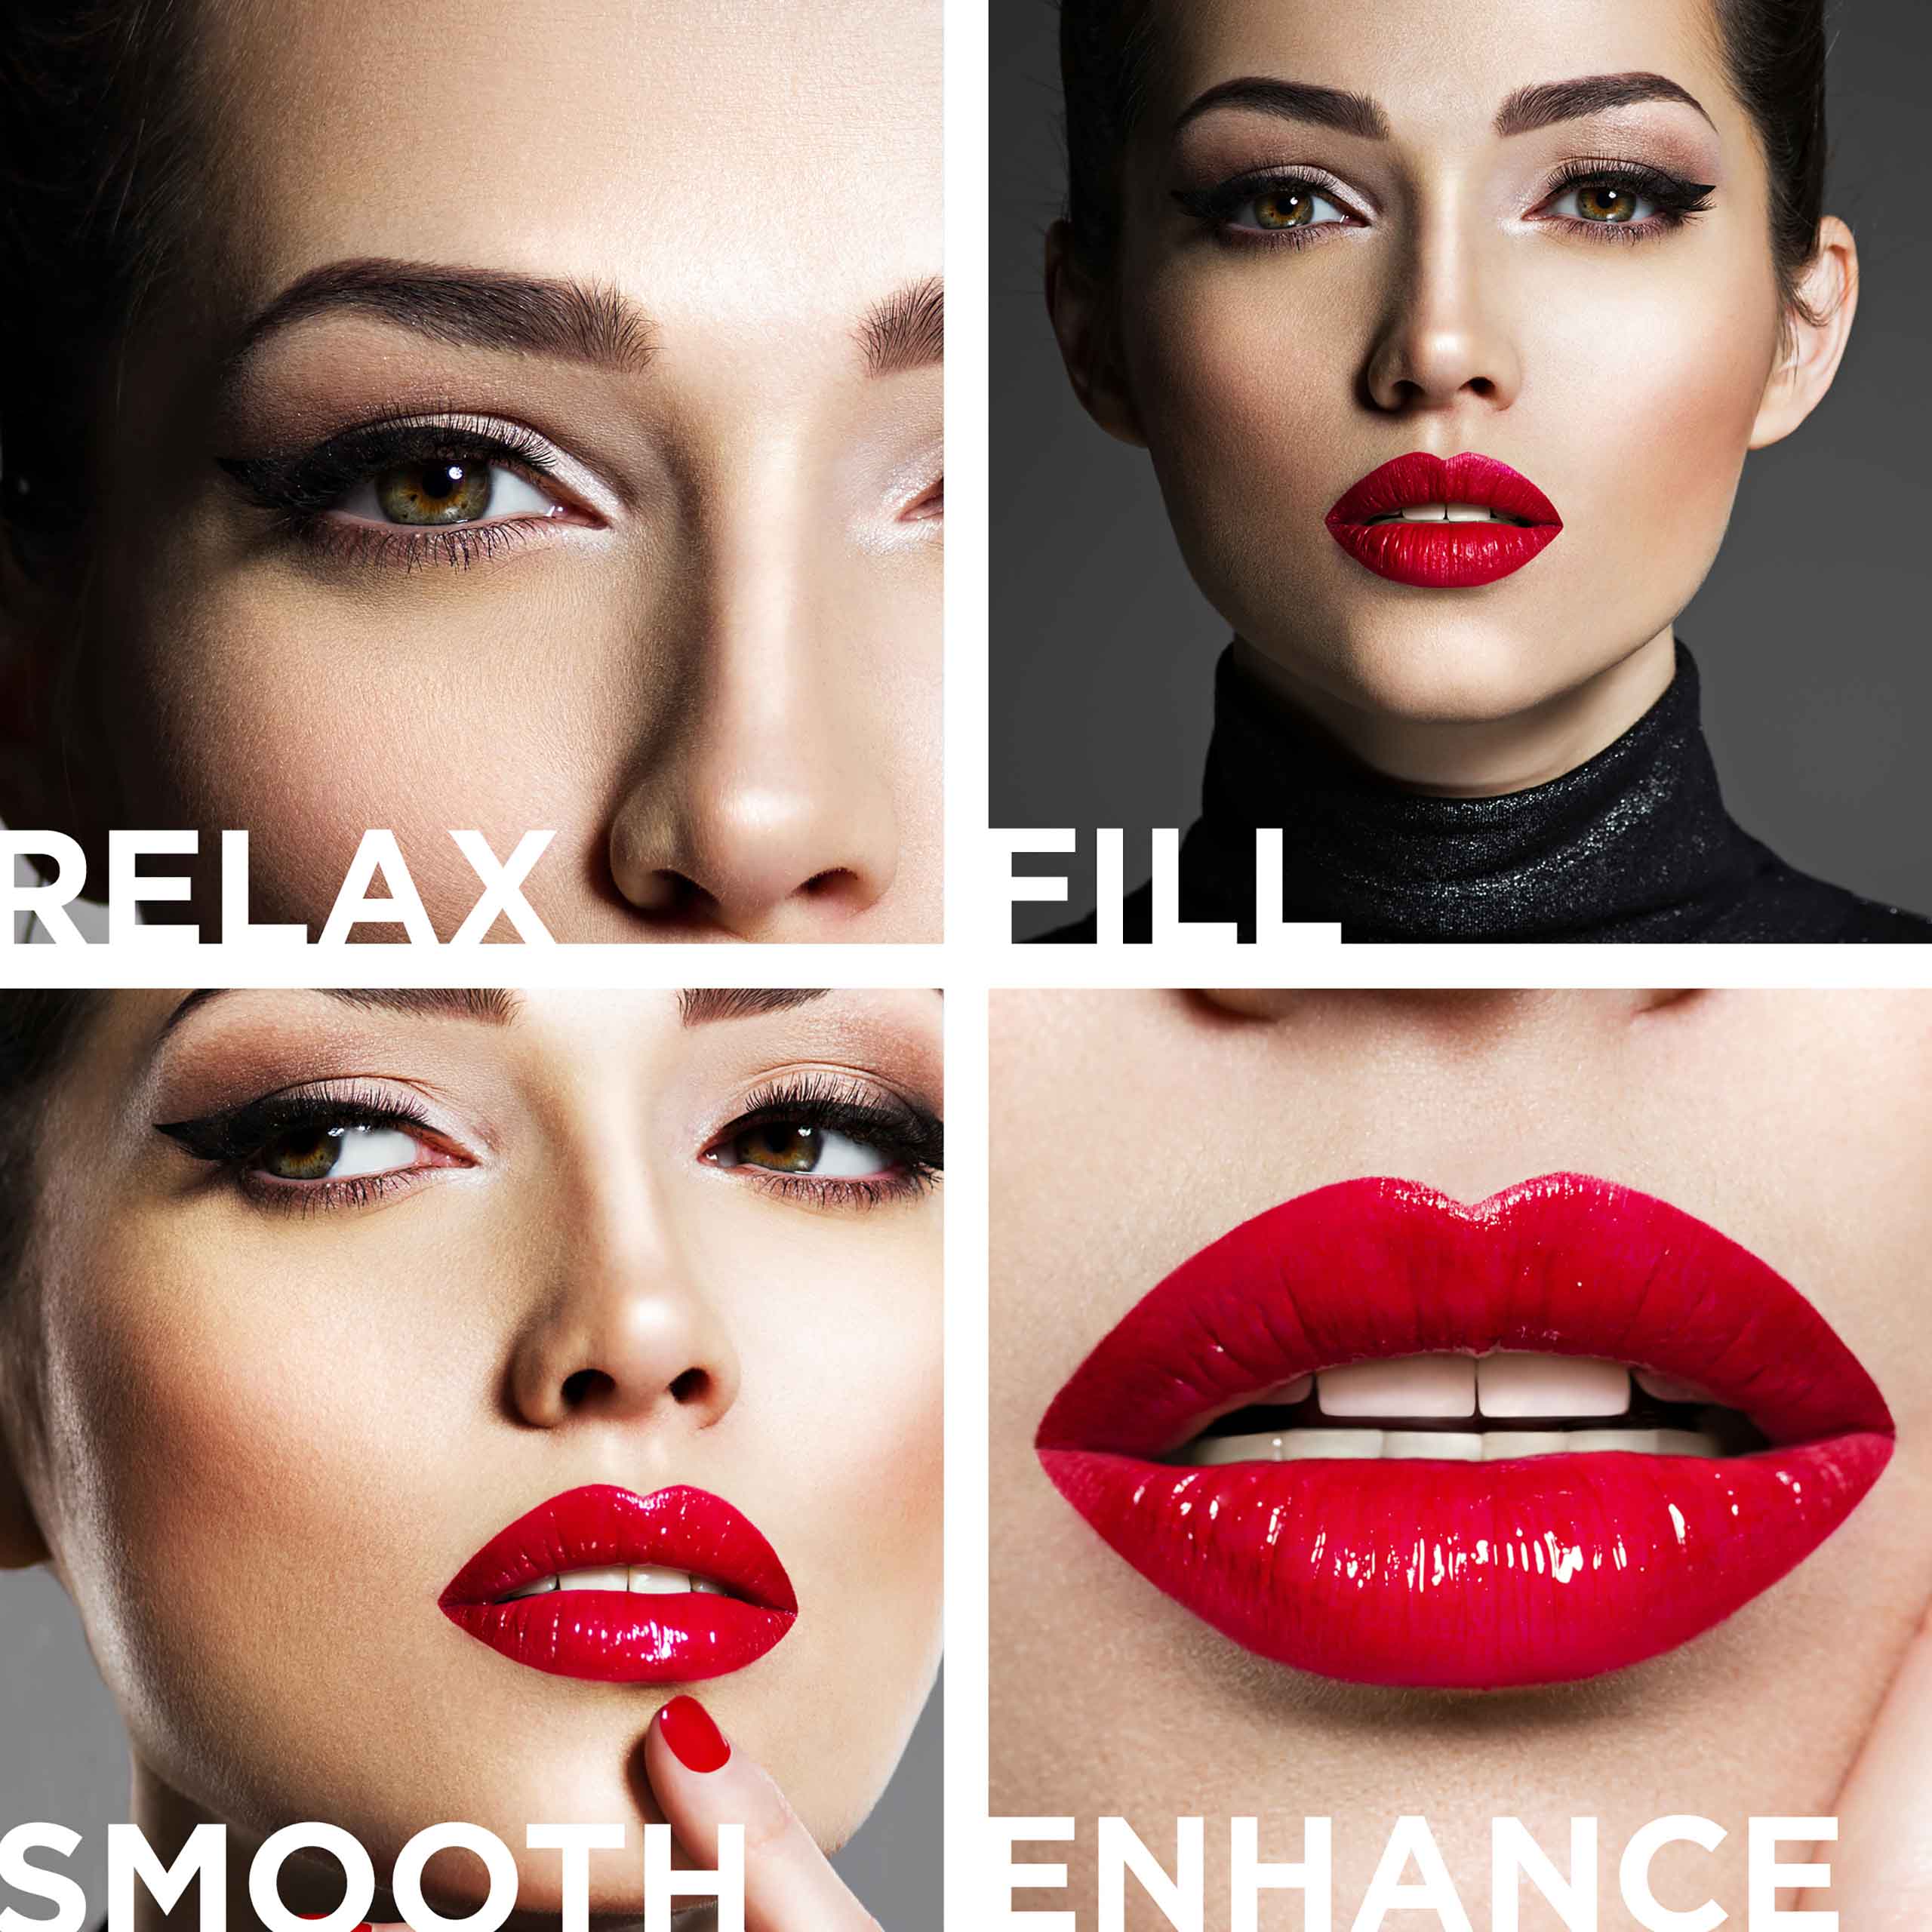 Relax Fill Smooth Enhance